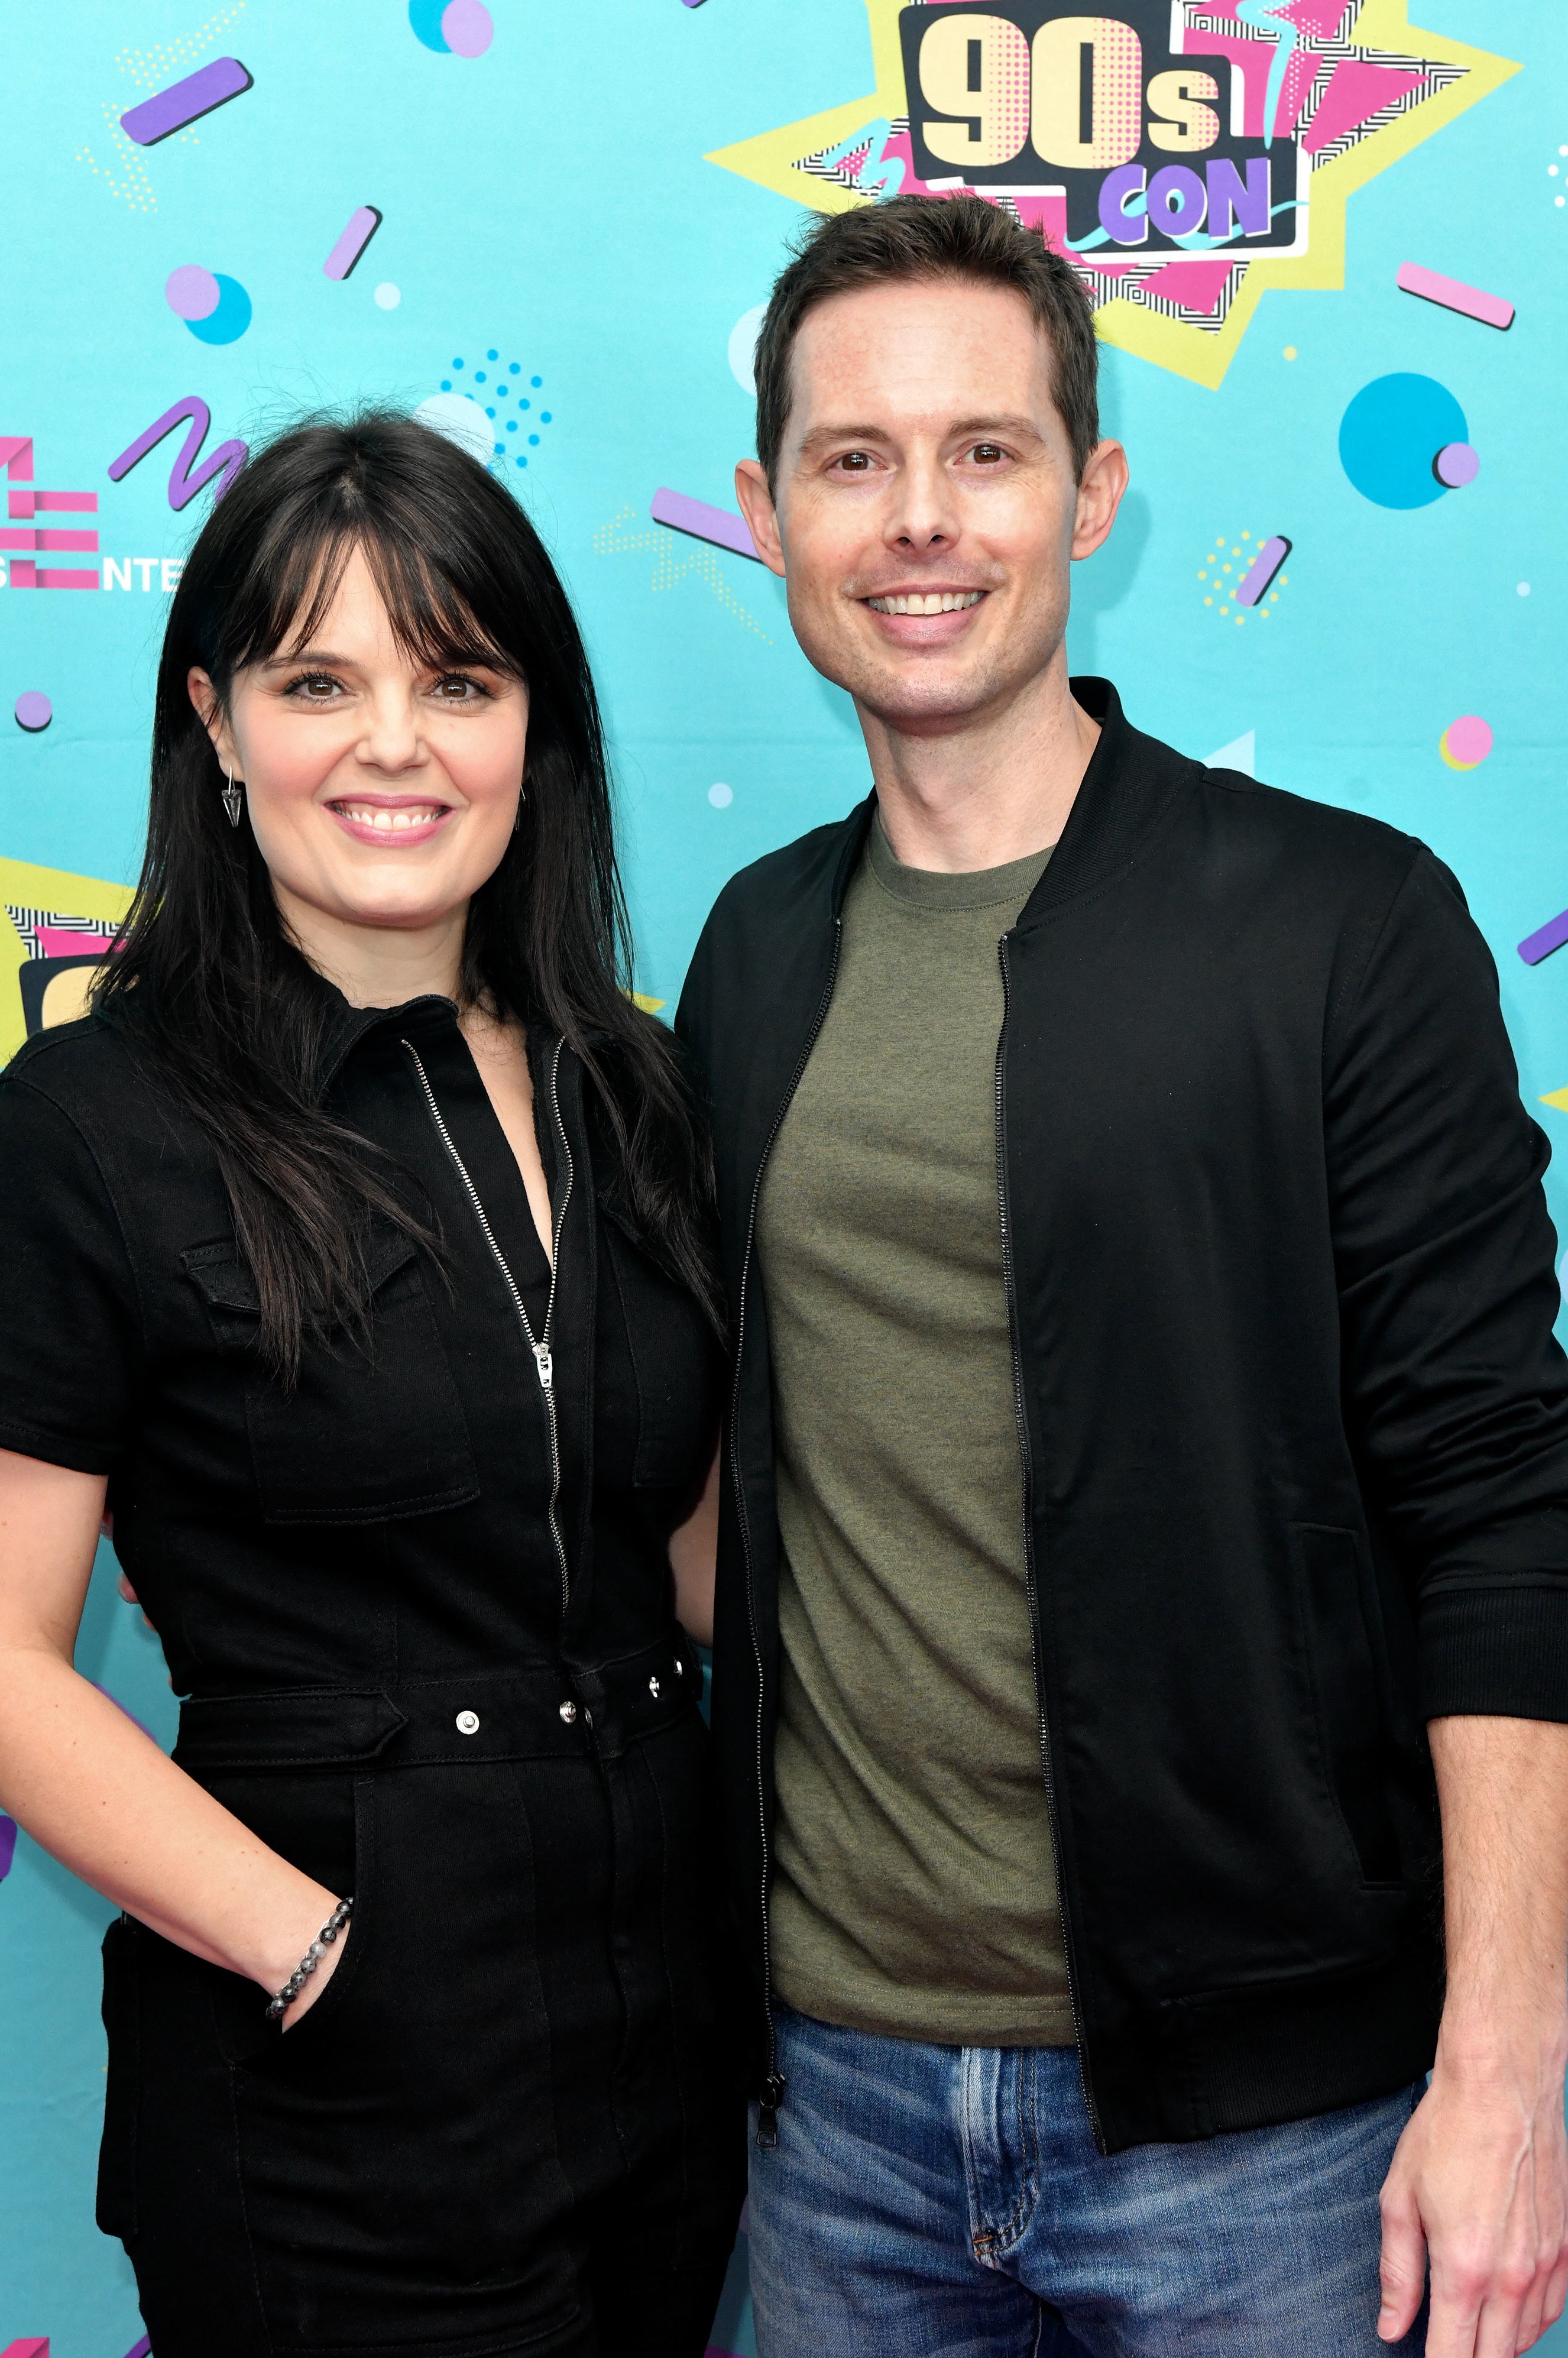 Two individuals posing together at a &#x27;90s Con event, woman in black outfit, man in black jacket and green shirt